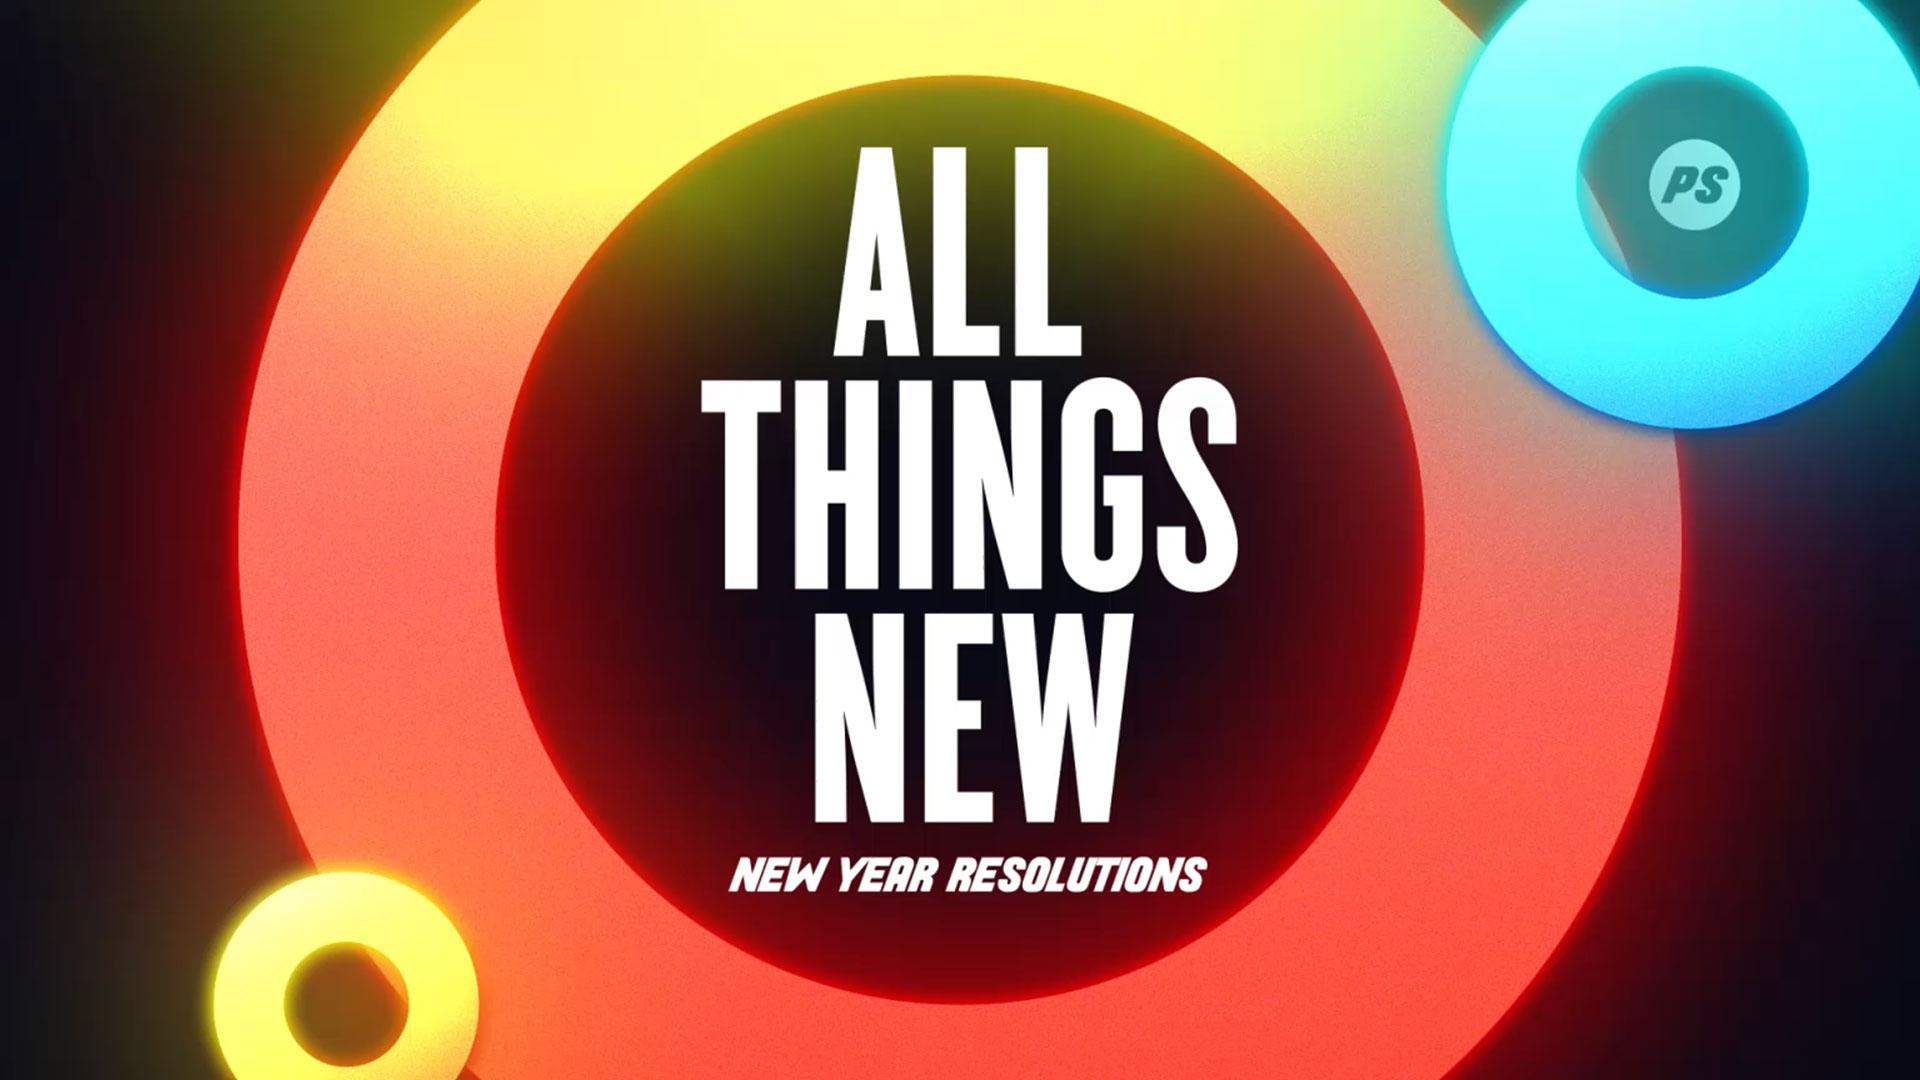 Featured image for “All Things New”